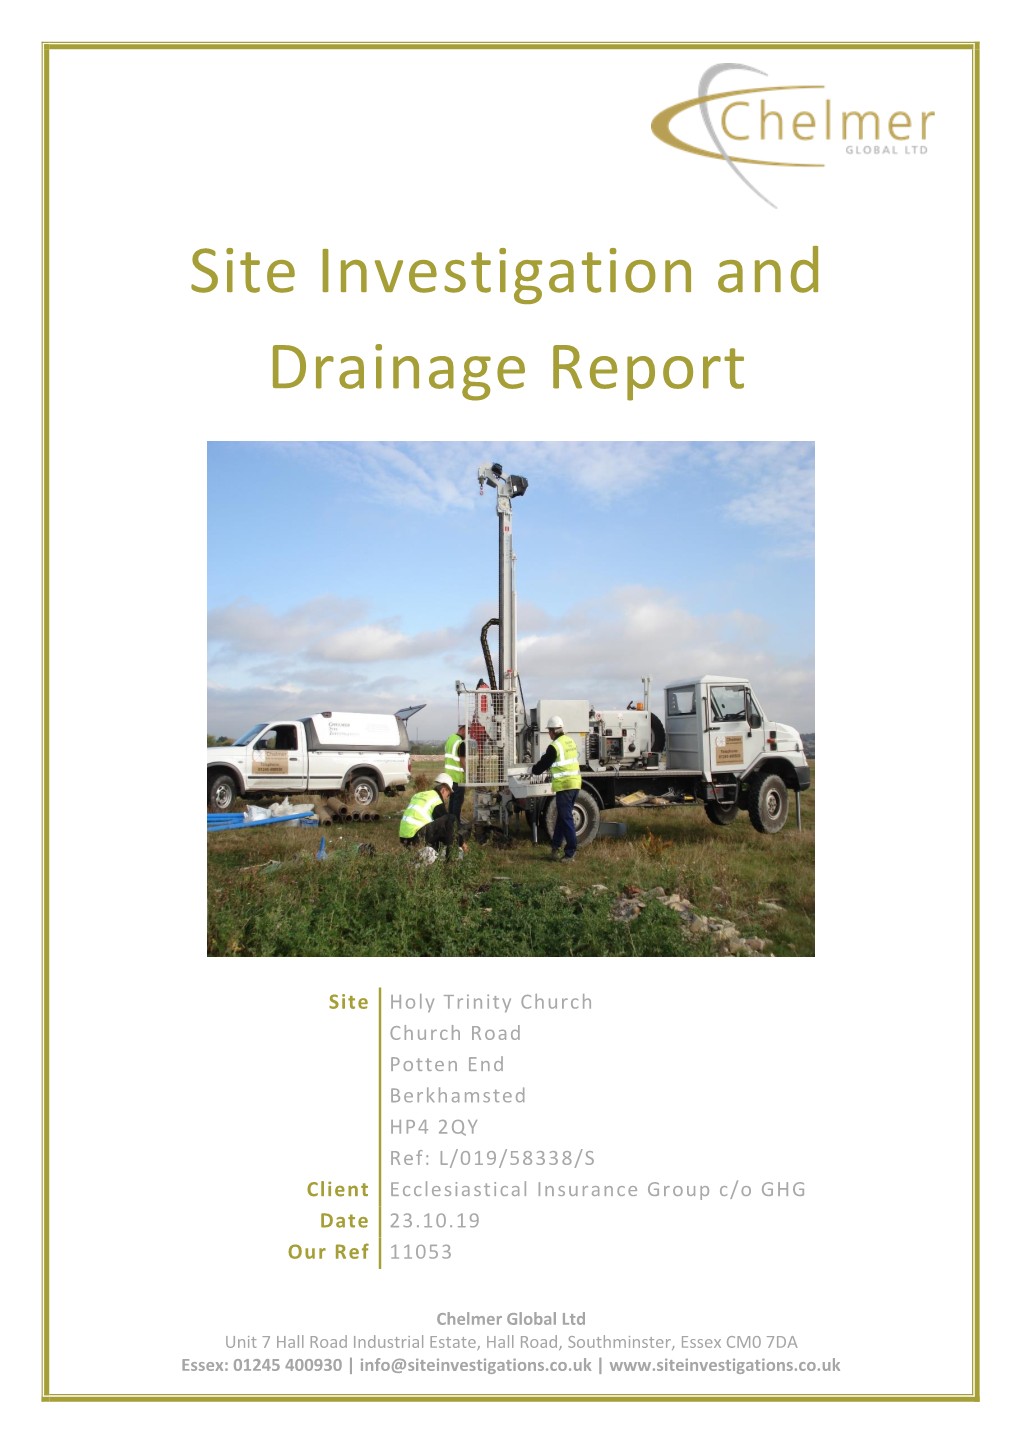 Site Investigation and Drainage Report Content